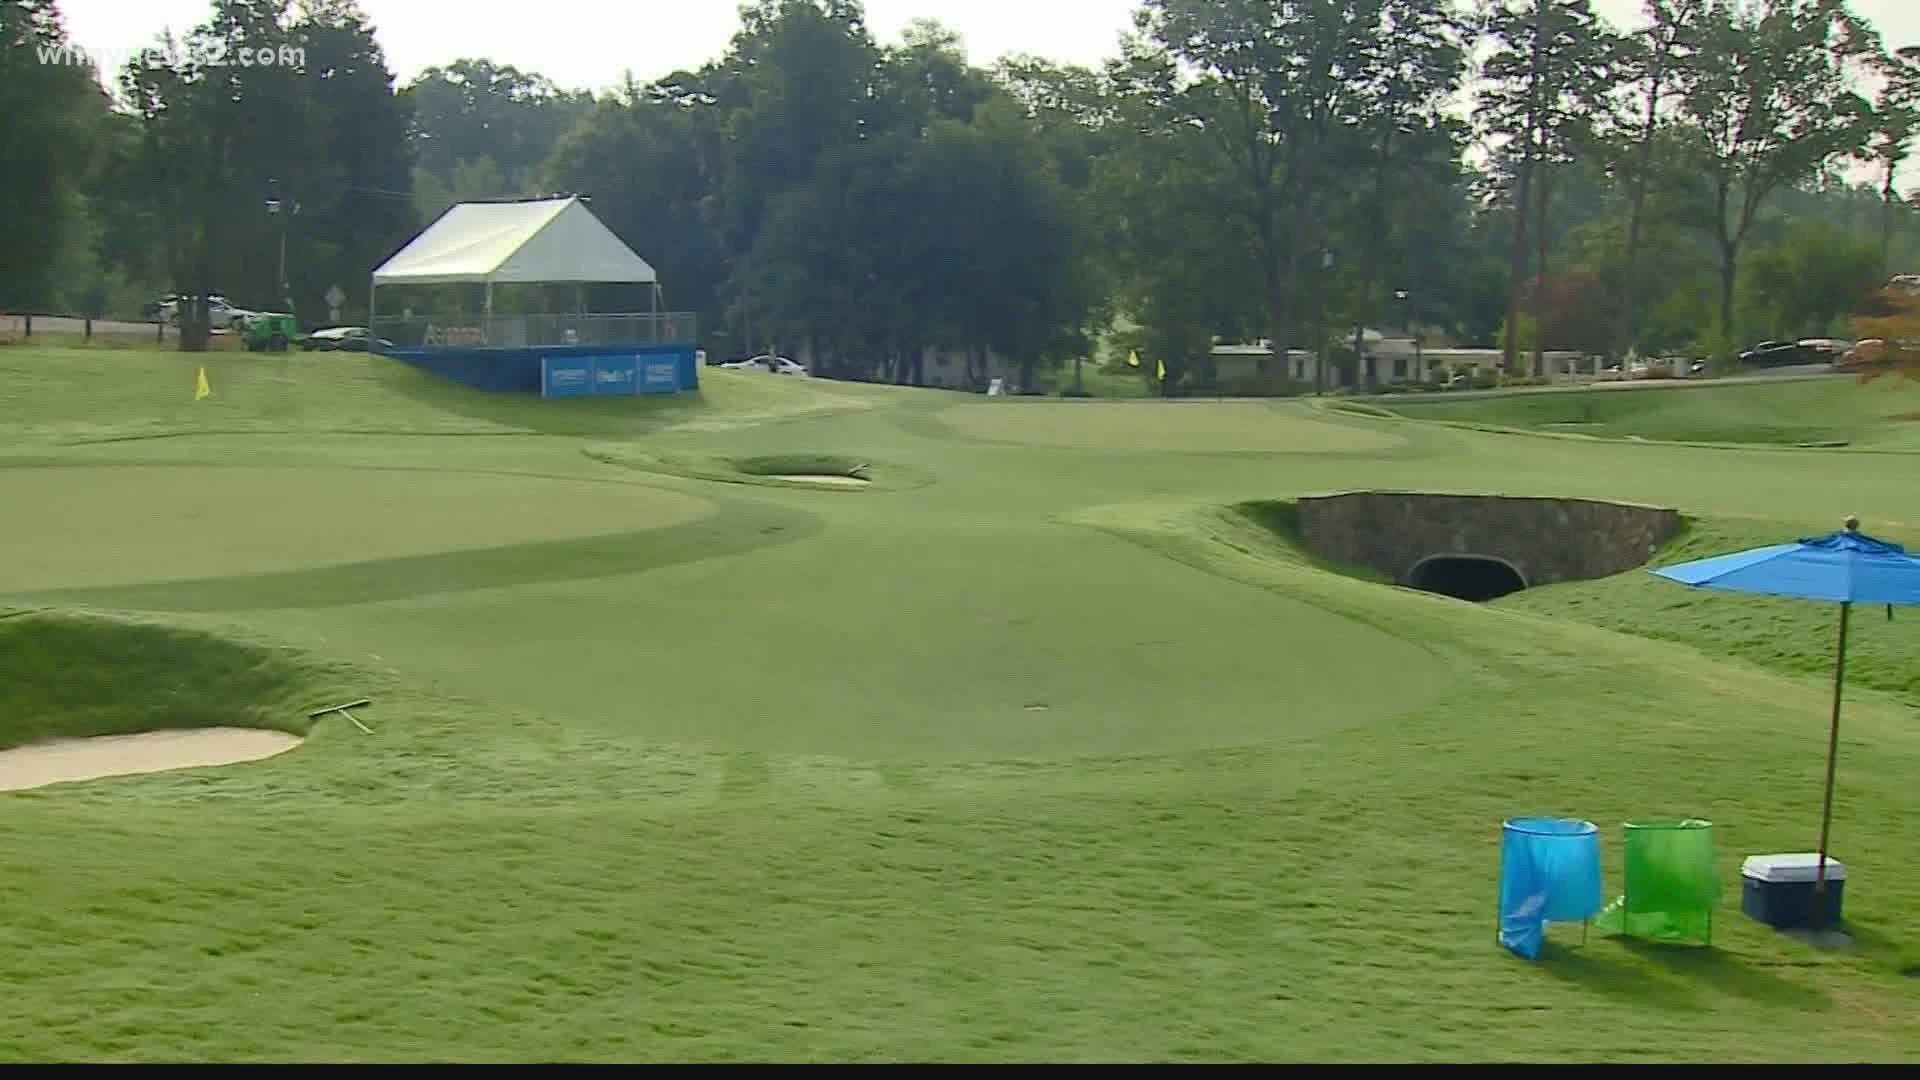 The 81st Annual Wyndham Championship runs from August 13-16 at Sedgefield Country Club in Greensboro.